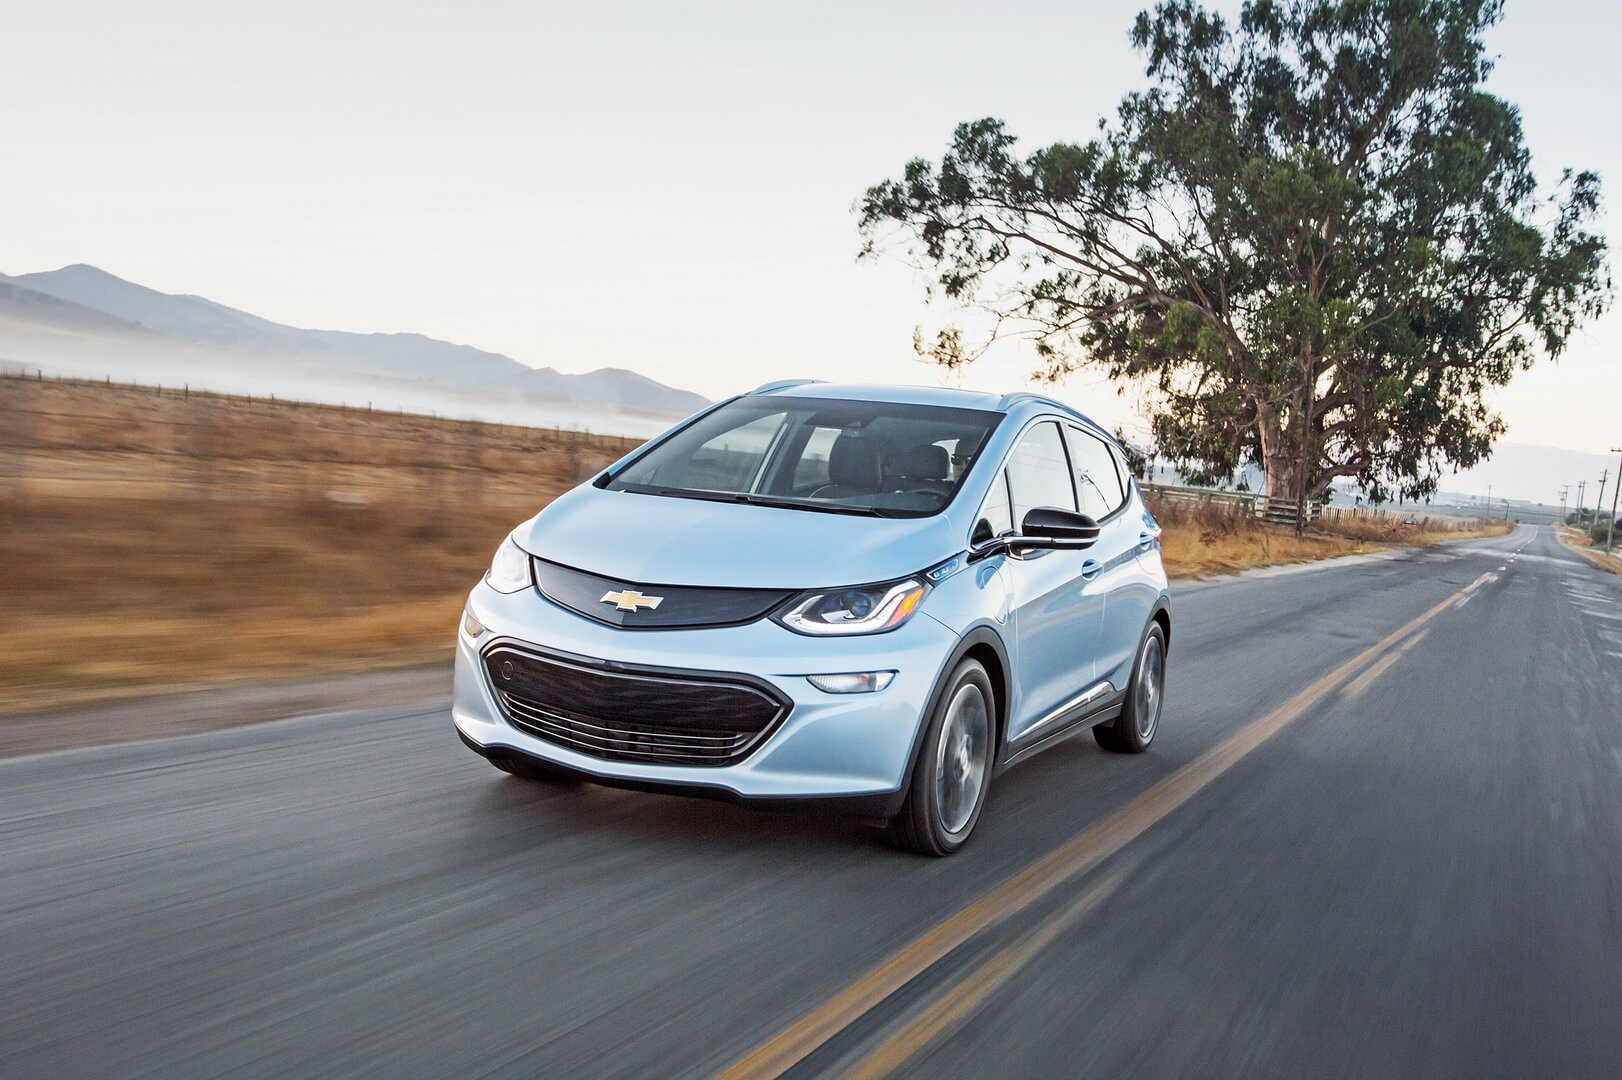 GM Recalls Nearly 69,000 Bolt EVs for Fire Risk, NHTSA Involved